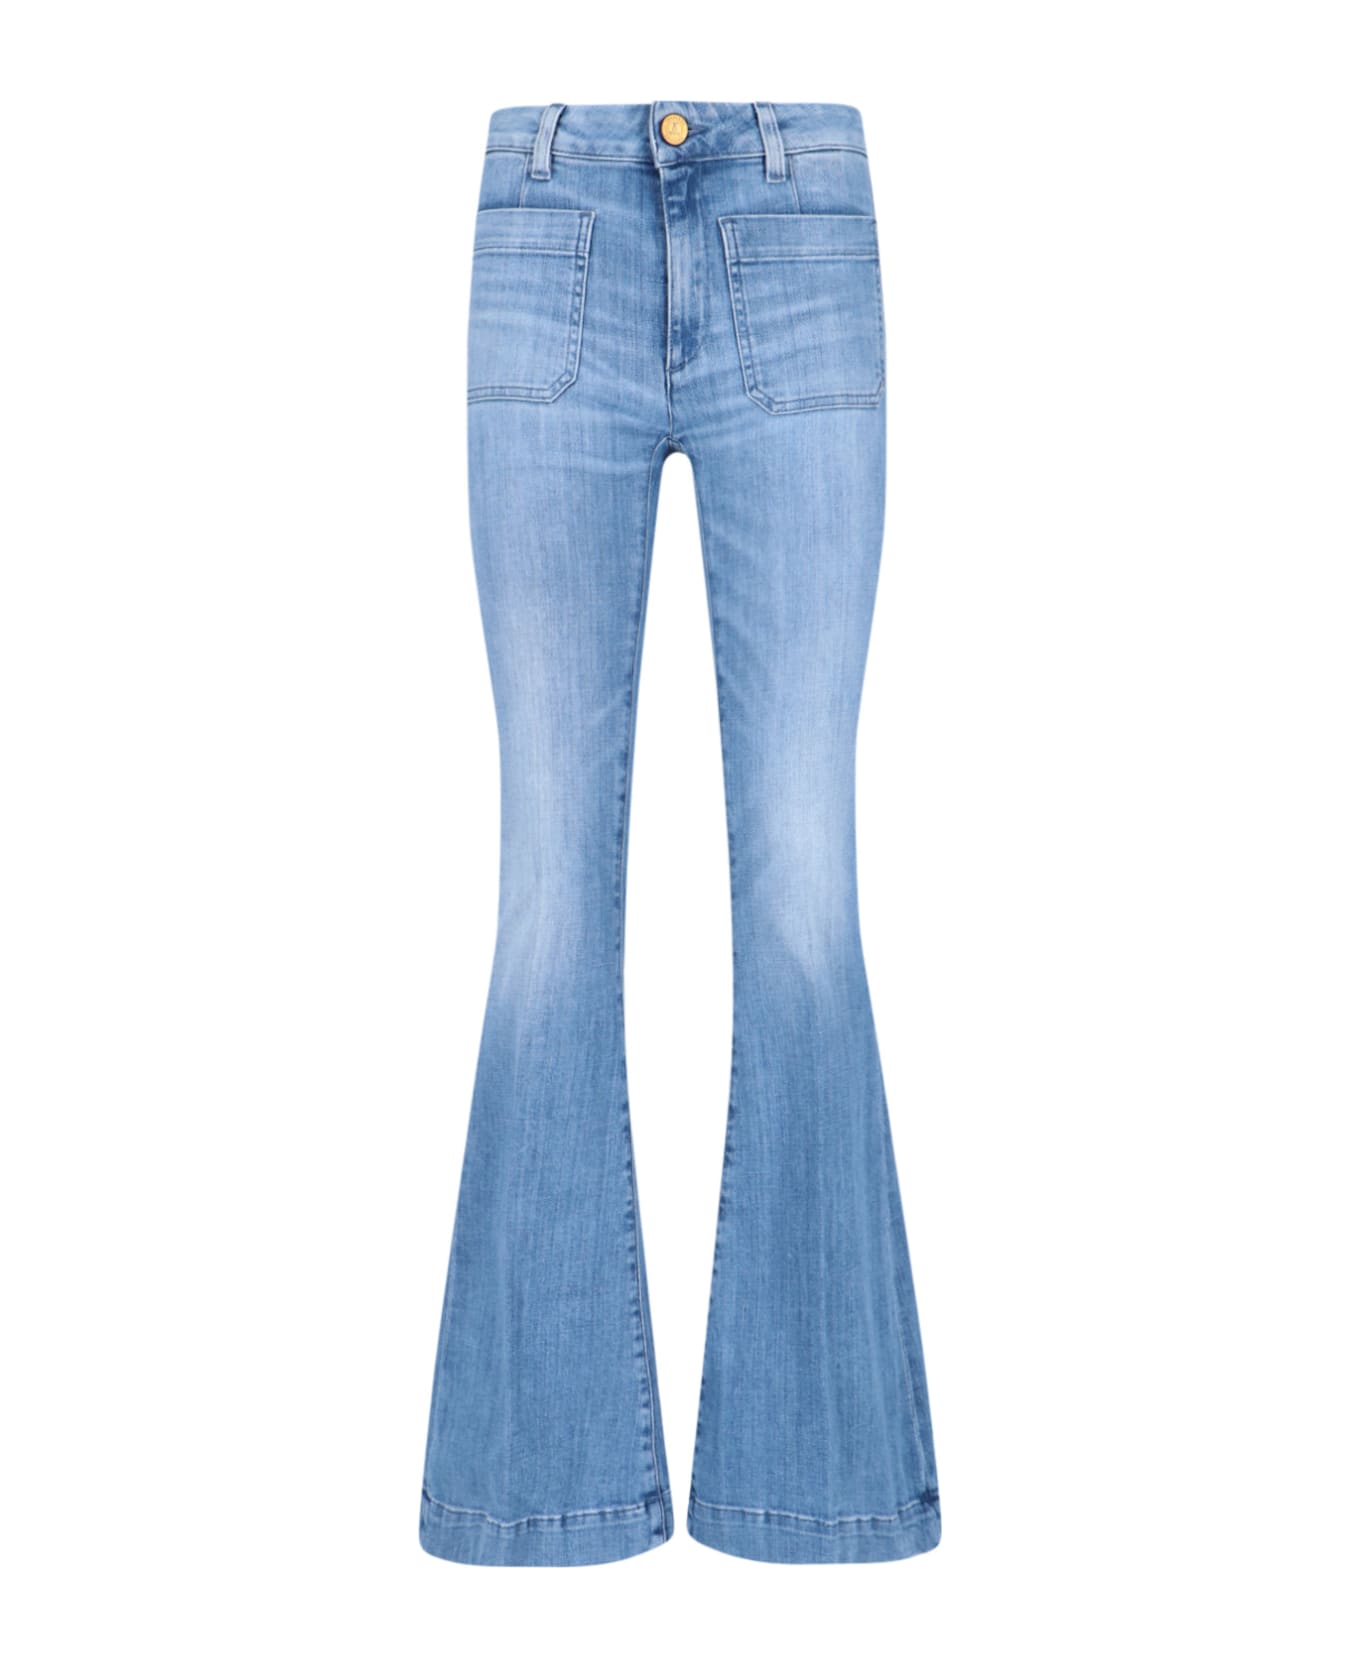 The Seafarer Jeans Bootcut - Blue デニム